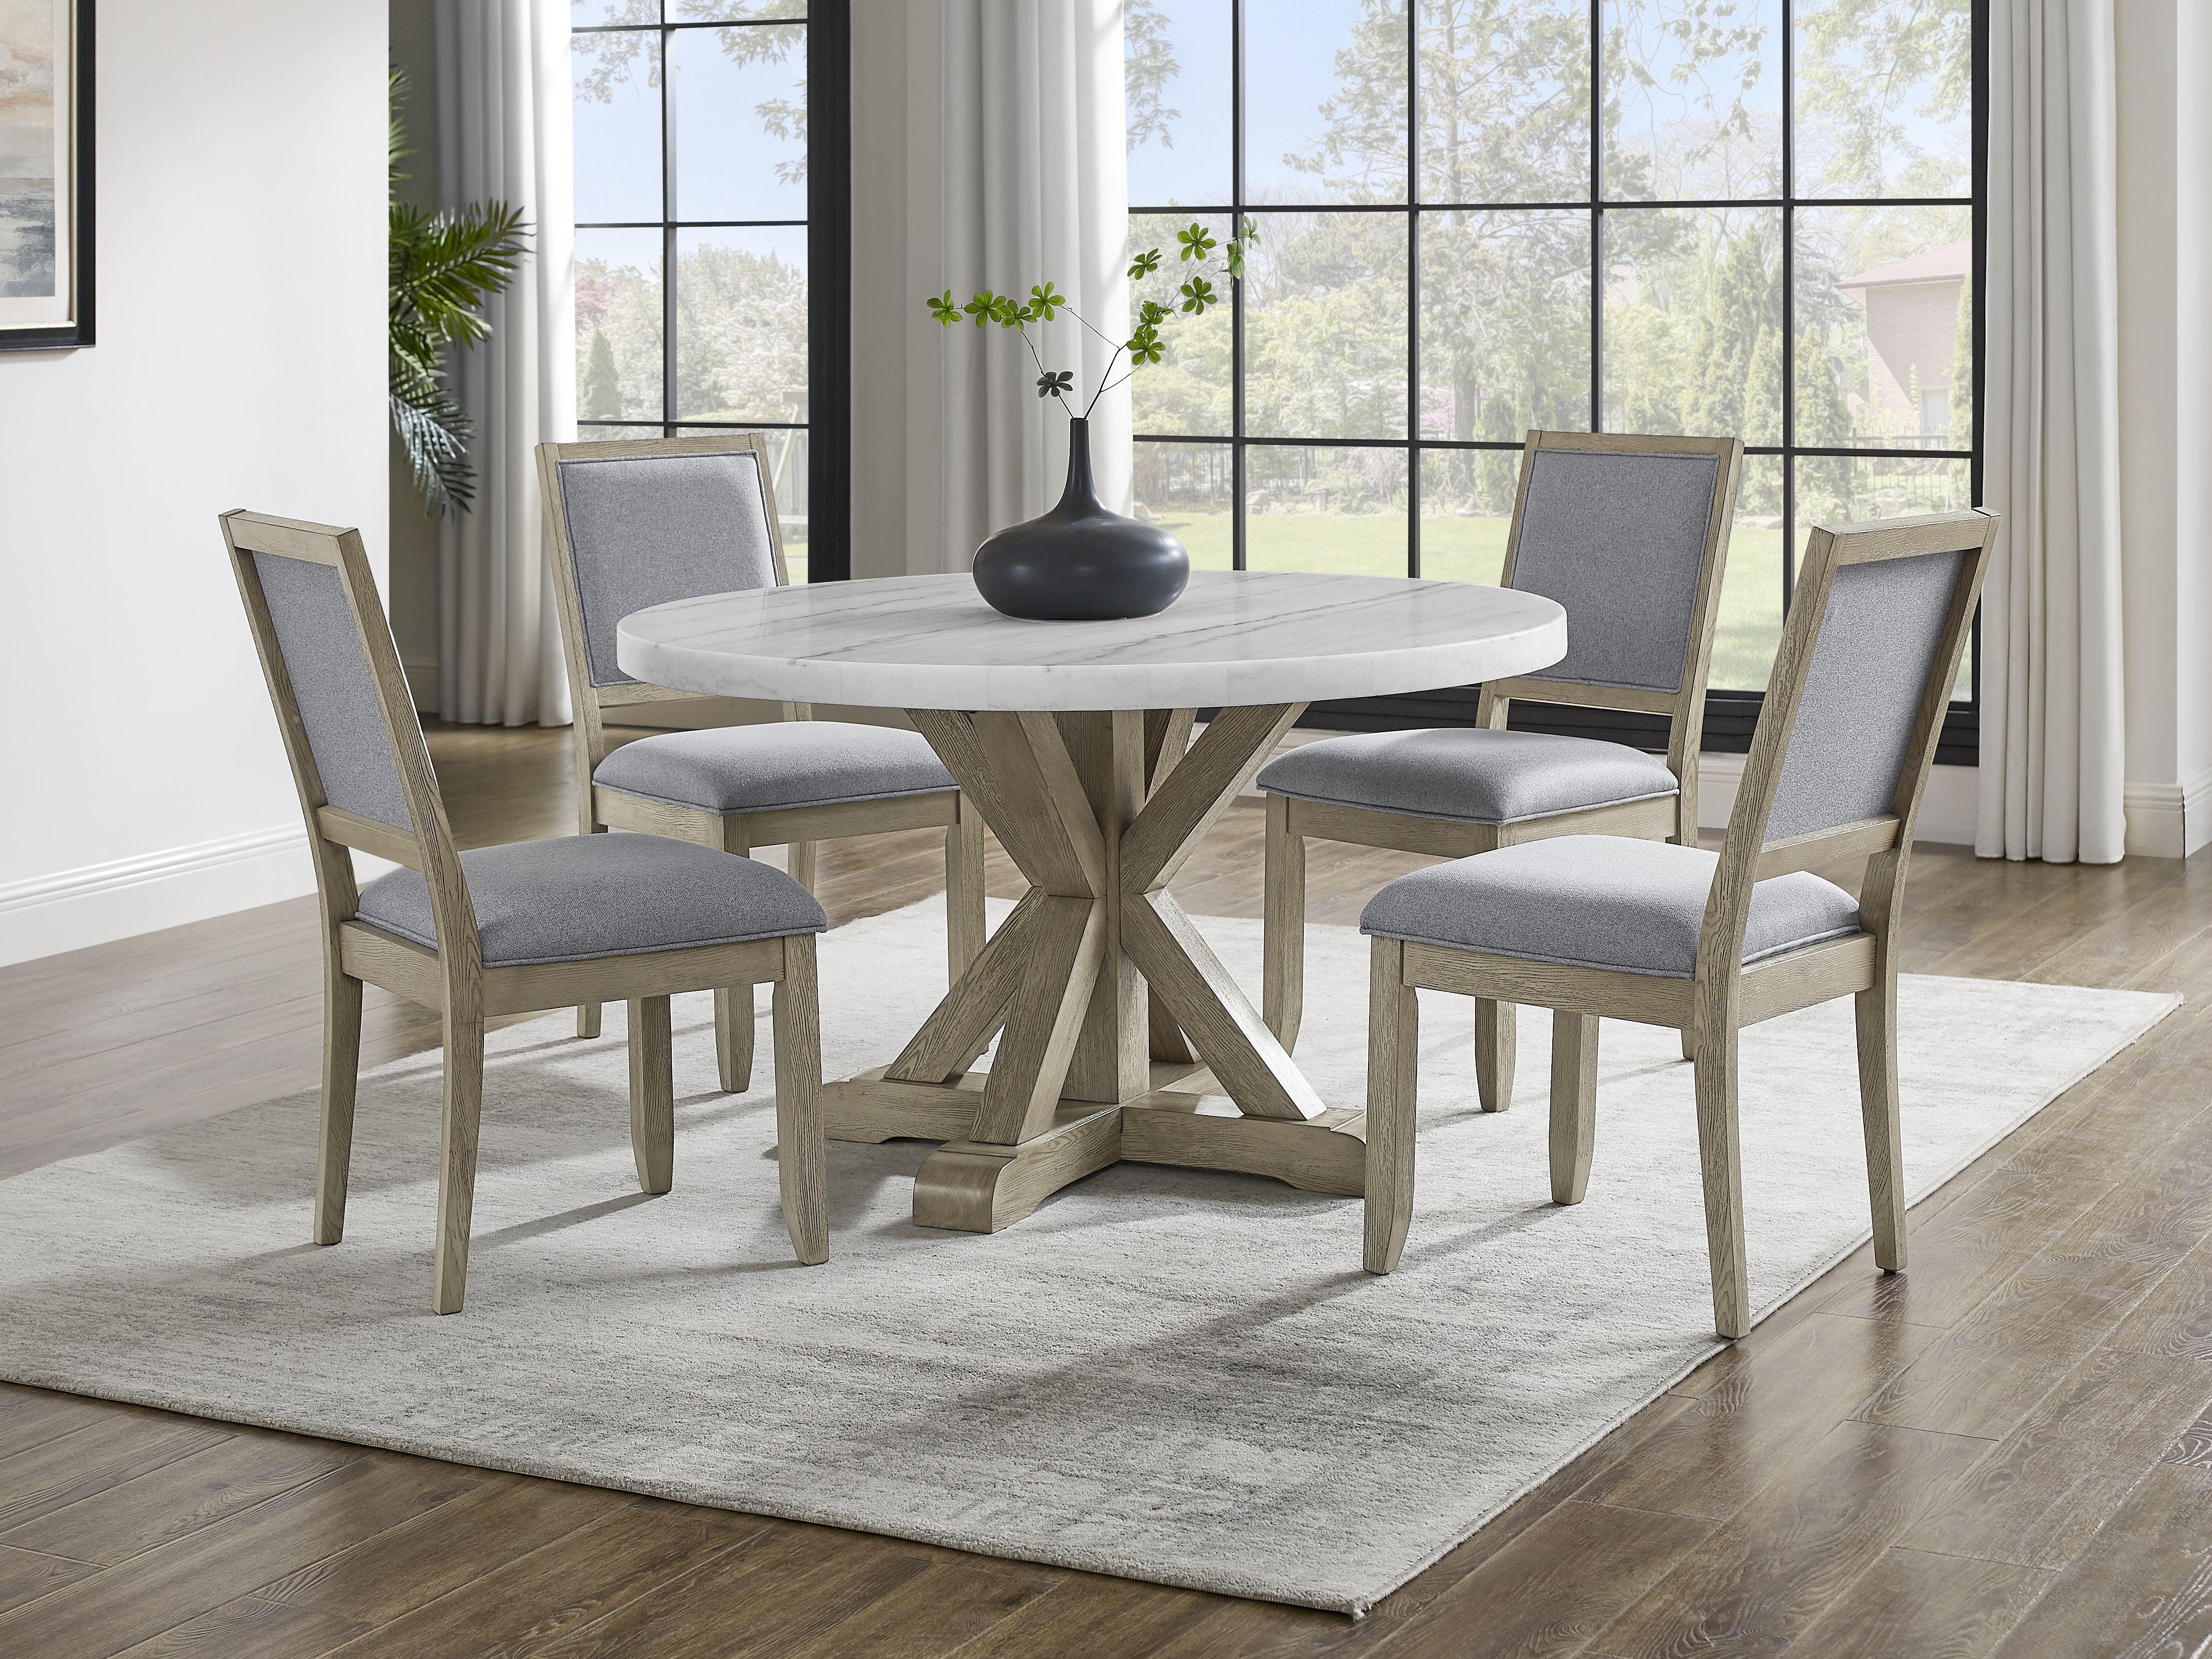 Steve Silver Furniture - Carena - 5 Piece Dining Set (Round Table And 4 Chairs) - Dark Gray - 5th Avenue Furniture